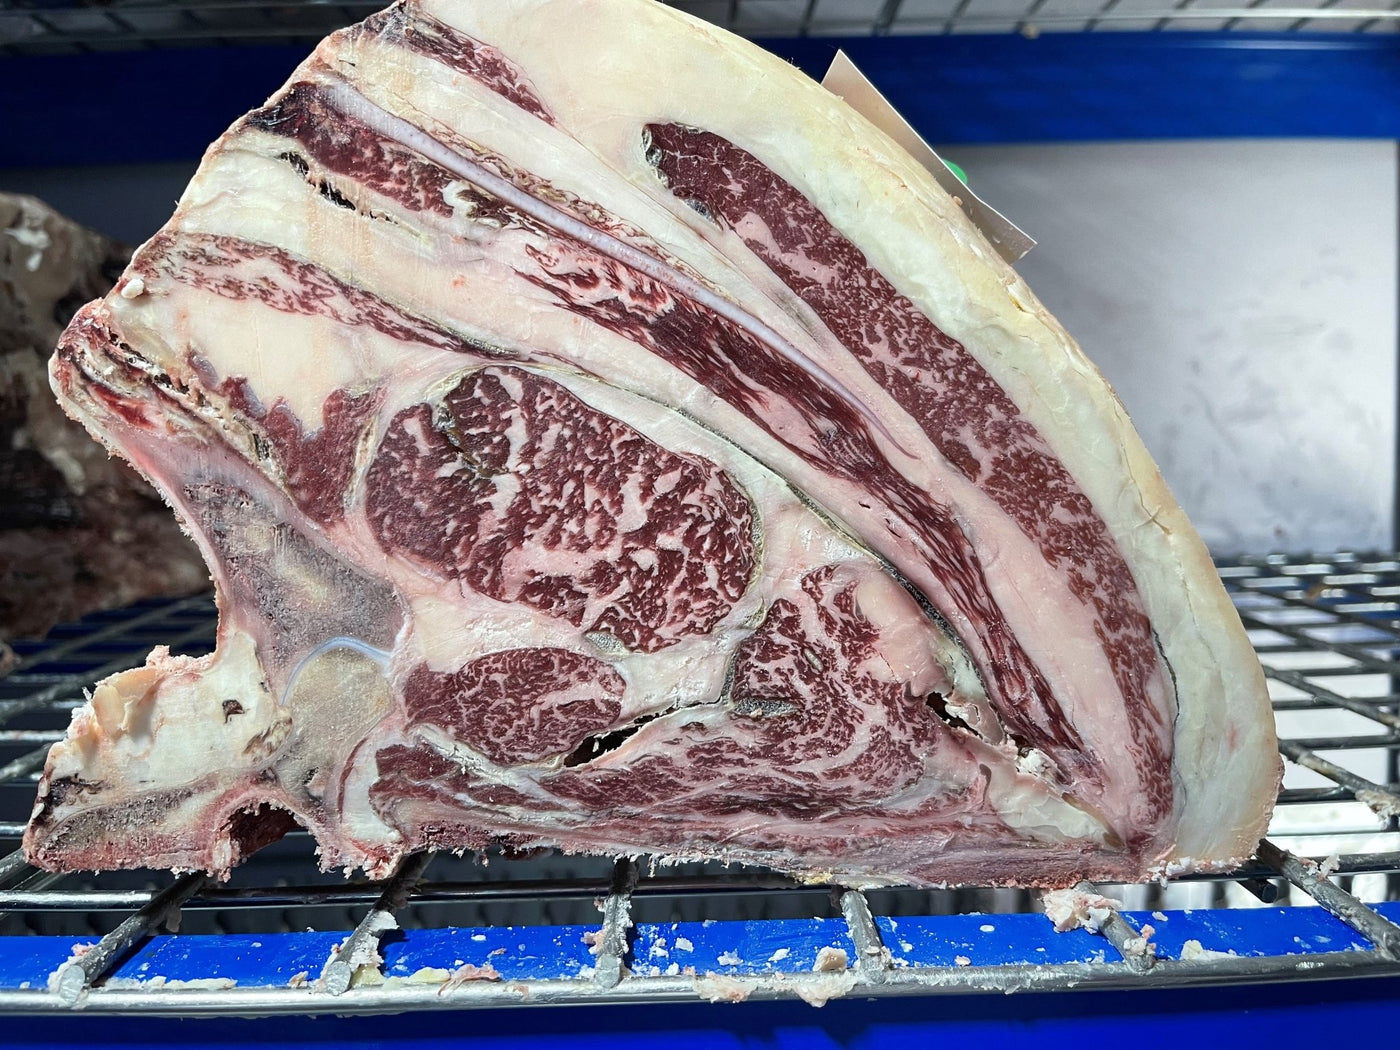 40 Day Dry-Aged "Dark Red", Spanish Ex Dairy - Thomas Joseph Butchery - Ethical Dry-Aged Meat The Best Steak UK Thomas Joseph Butchery